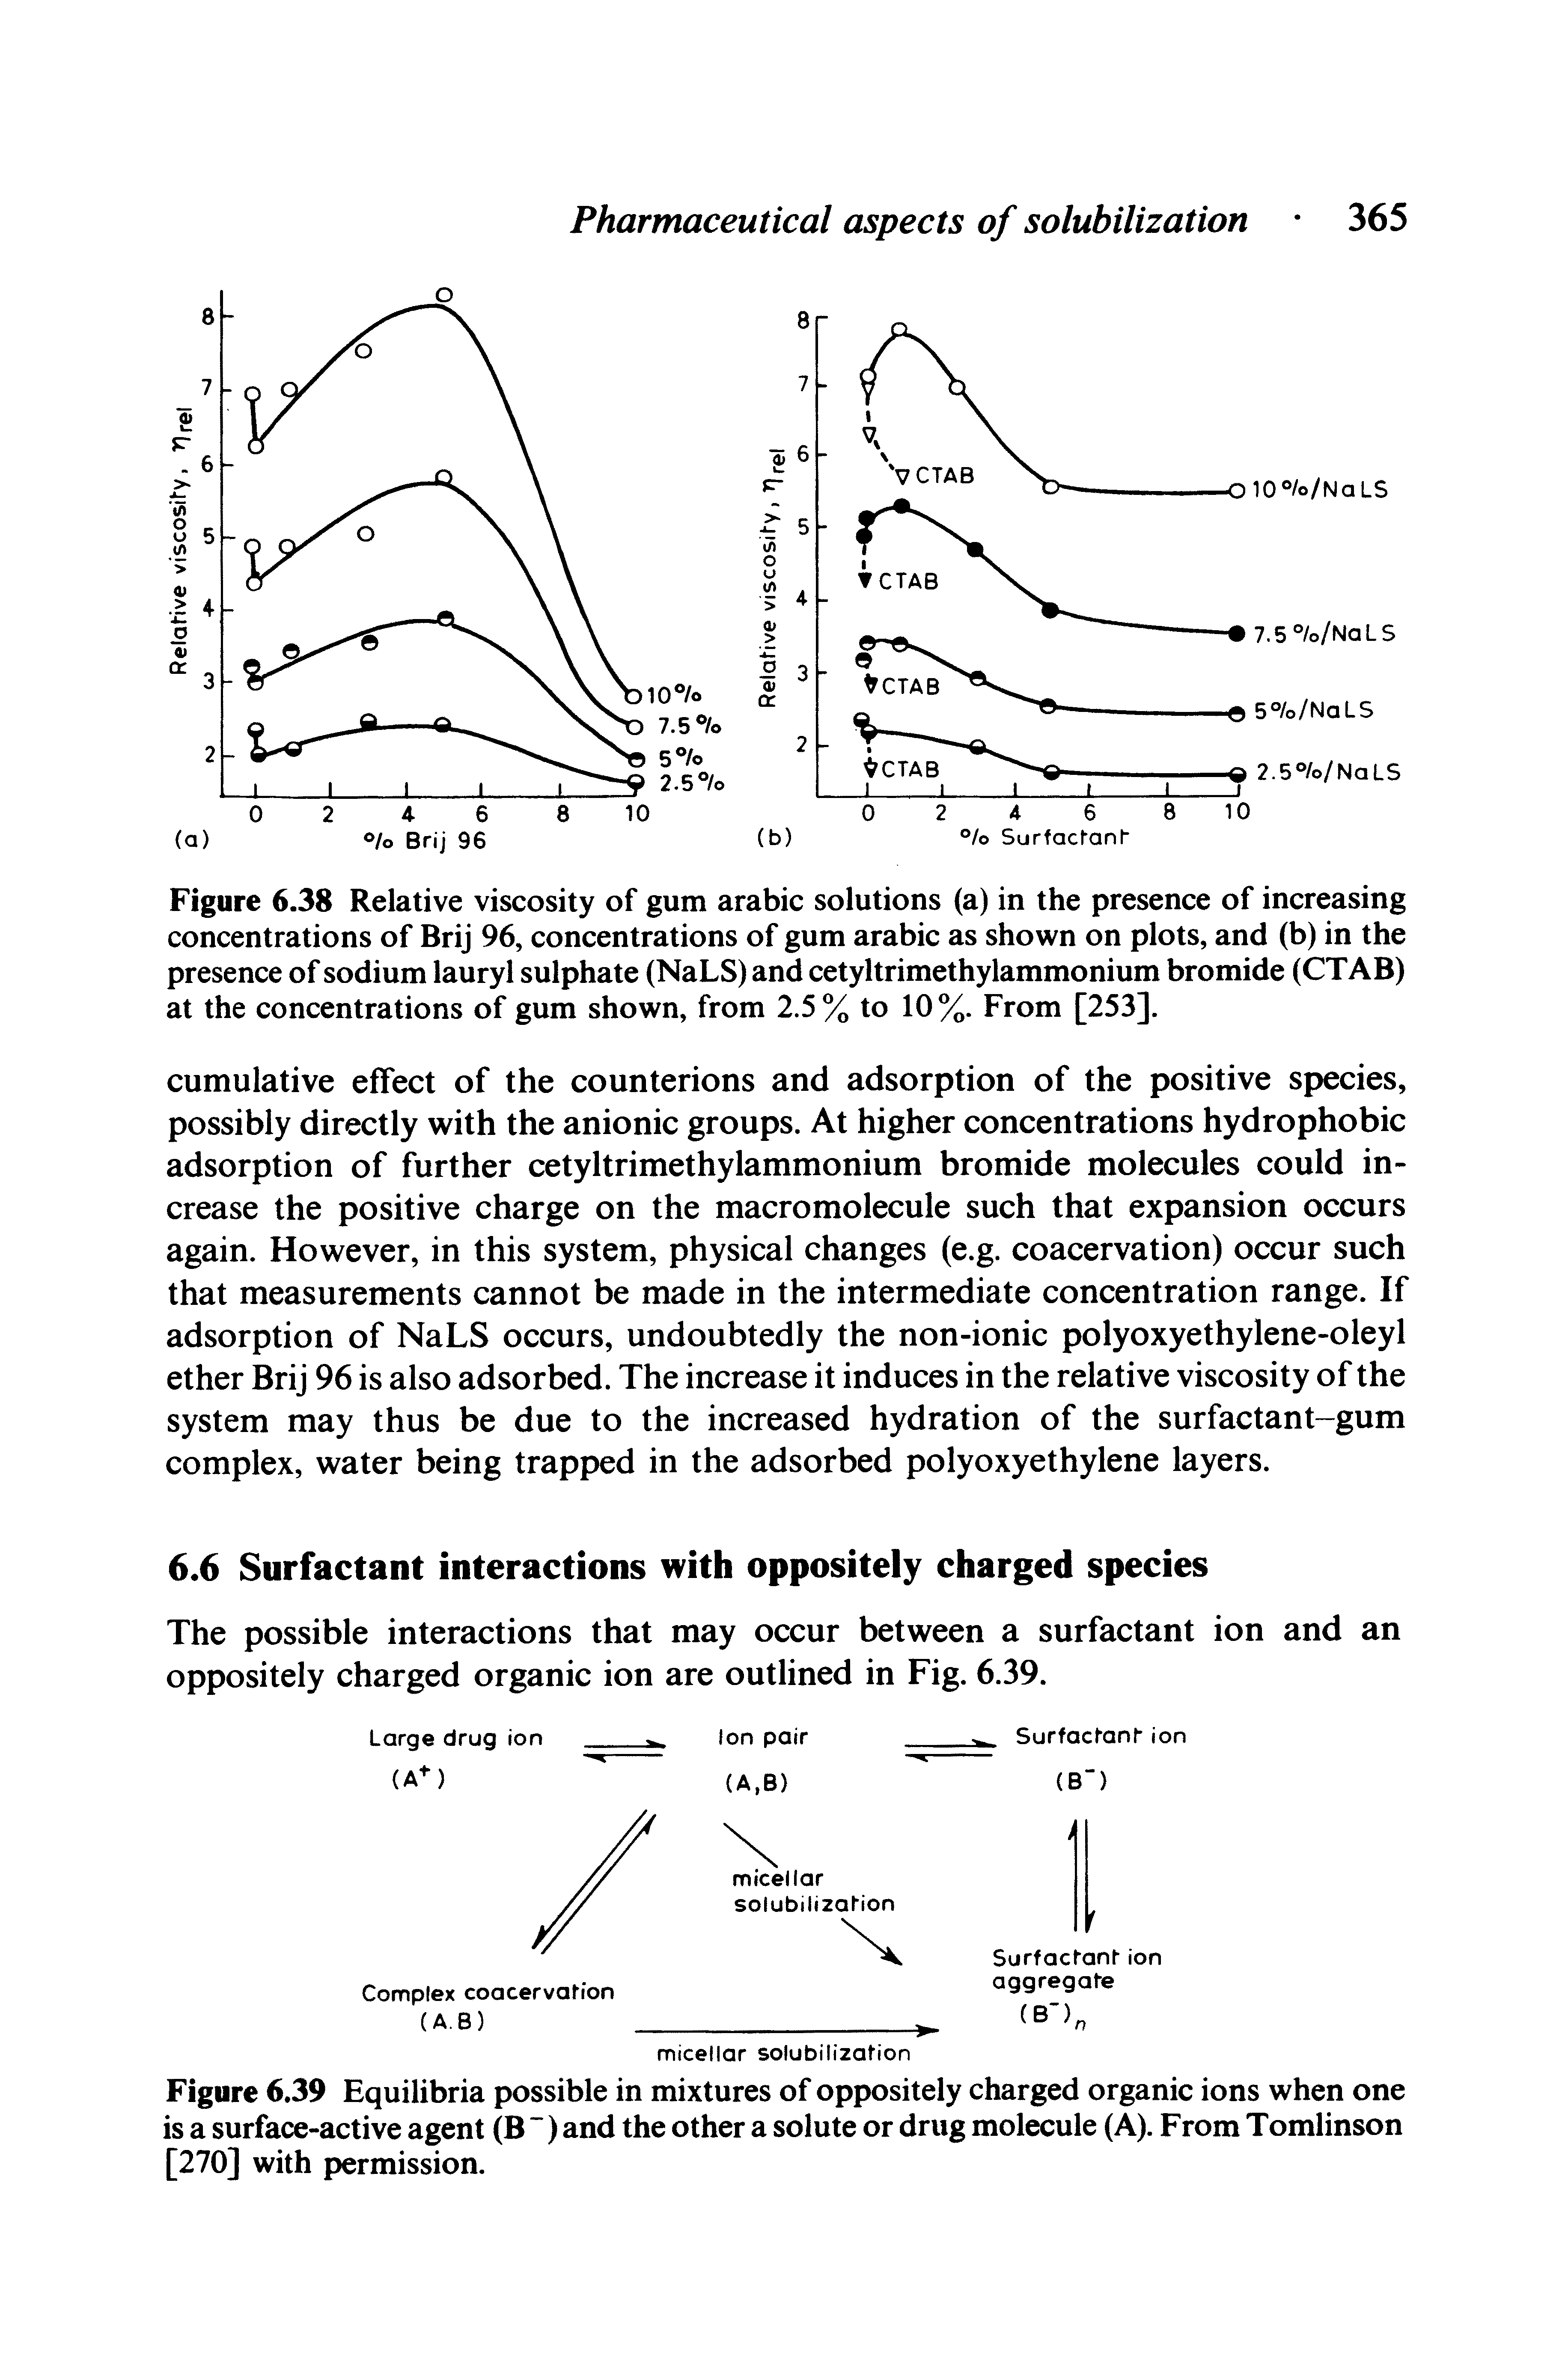 Figure 6.39 Equilibria possible in mixtures of oppositely charged organic ions when one is a surface-active agent (B ) and the other a solute or drug molecule (A). From Tomlinson [270] with permission.